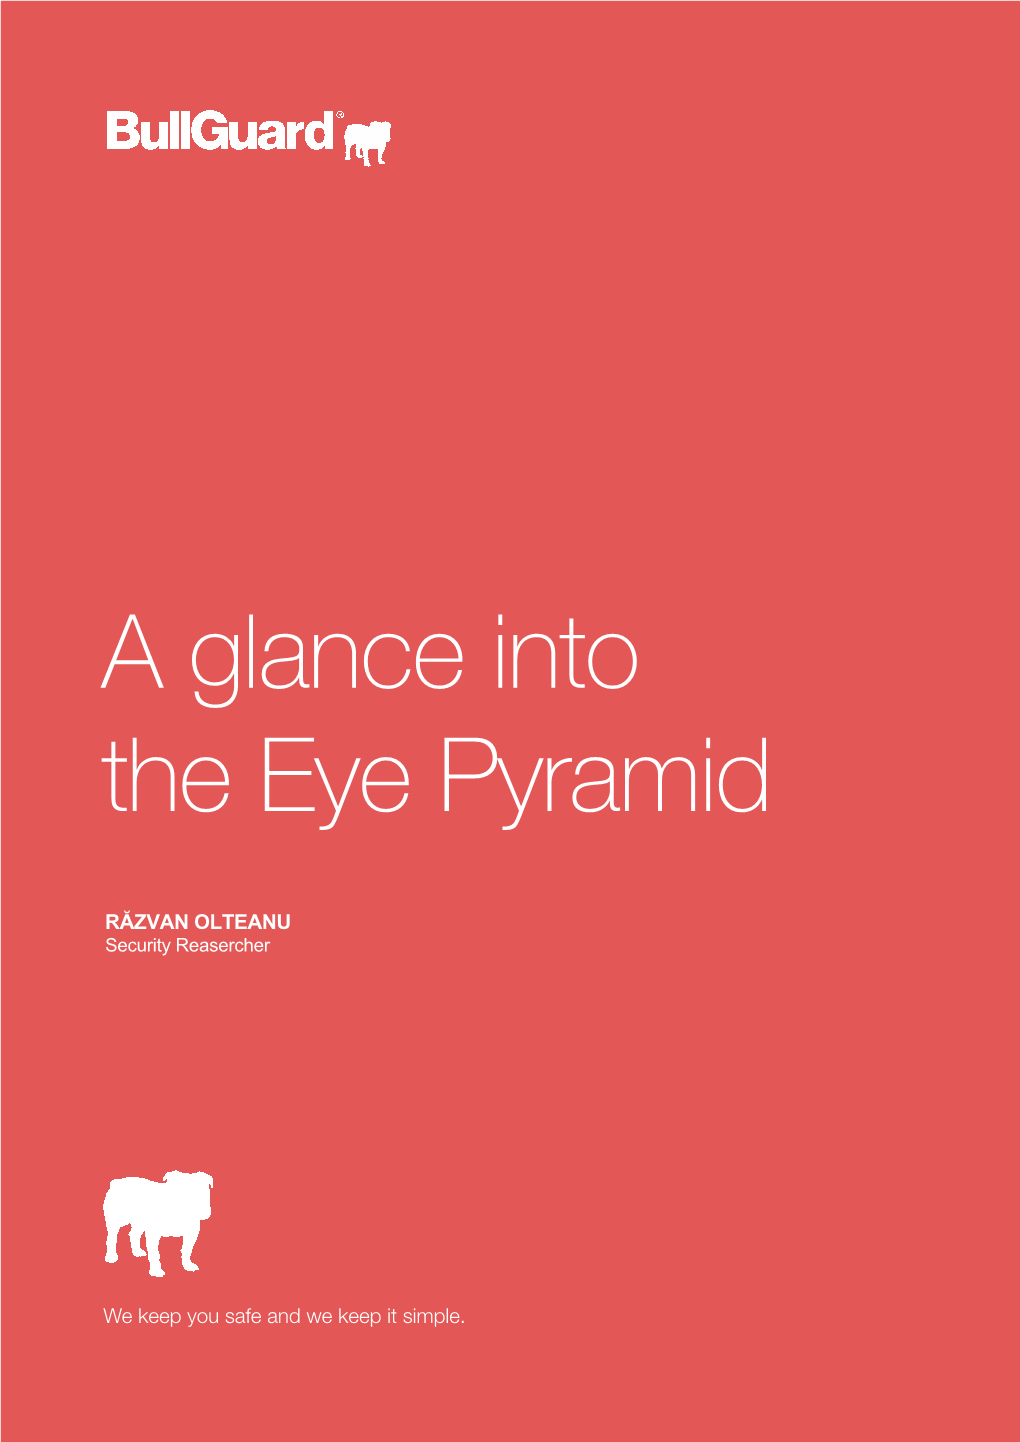 A Glance Into the Eye Pyramid Technical Article V2